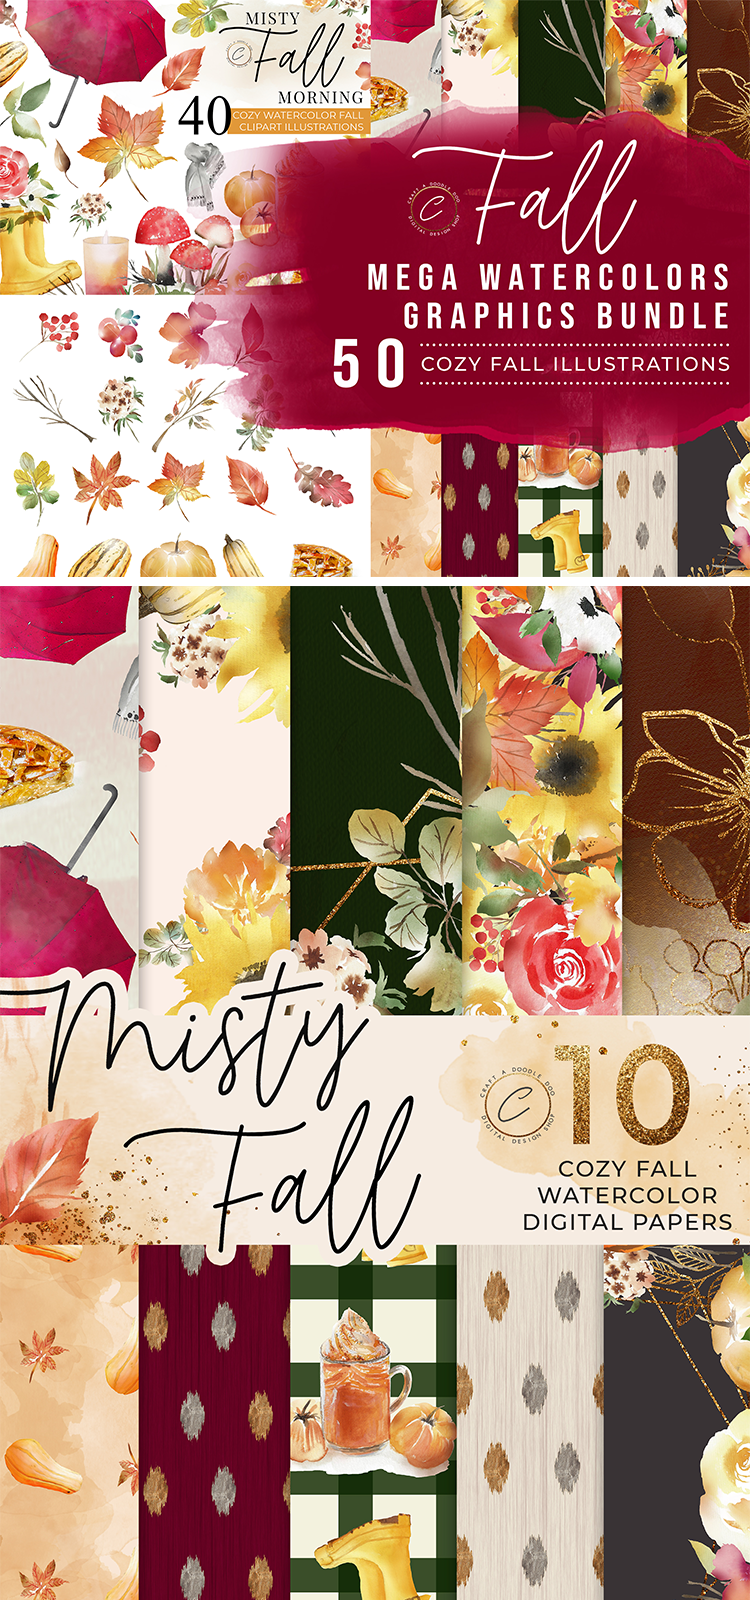 Fall Watercolor Graphics Bundle, Fall Clipart and Digital Paper Pack, Rustic Farmhouse Autumn Illustrations for commercial use